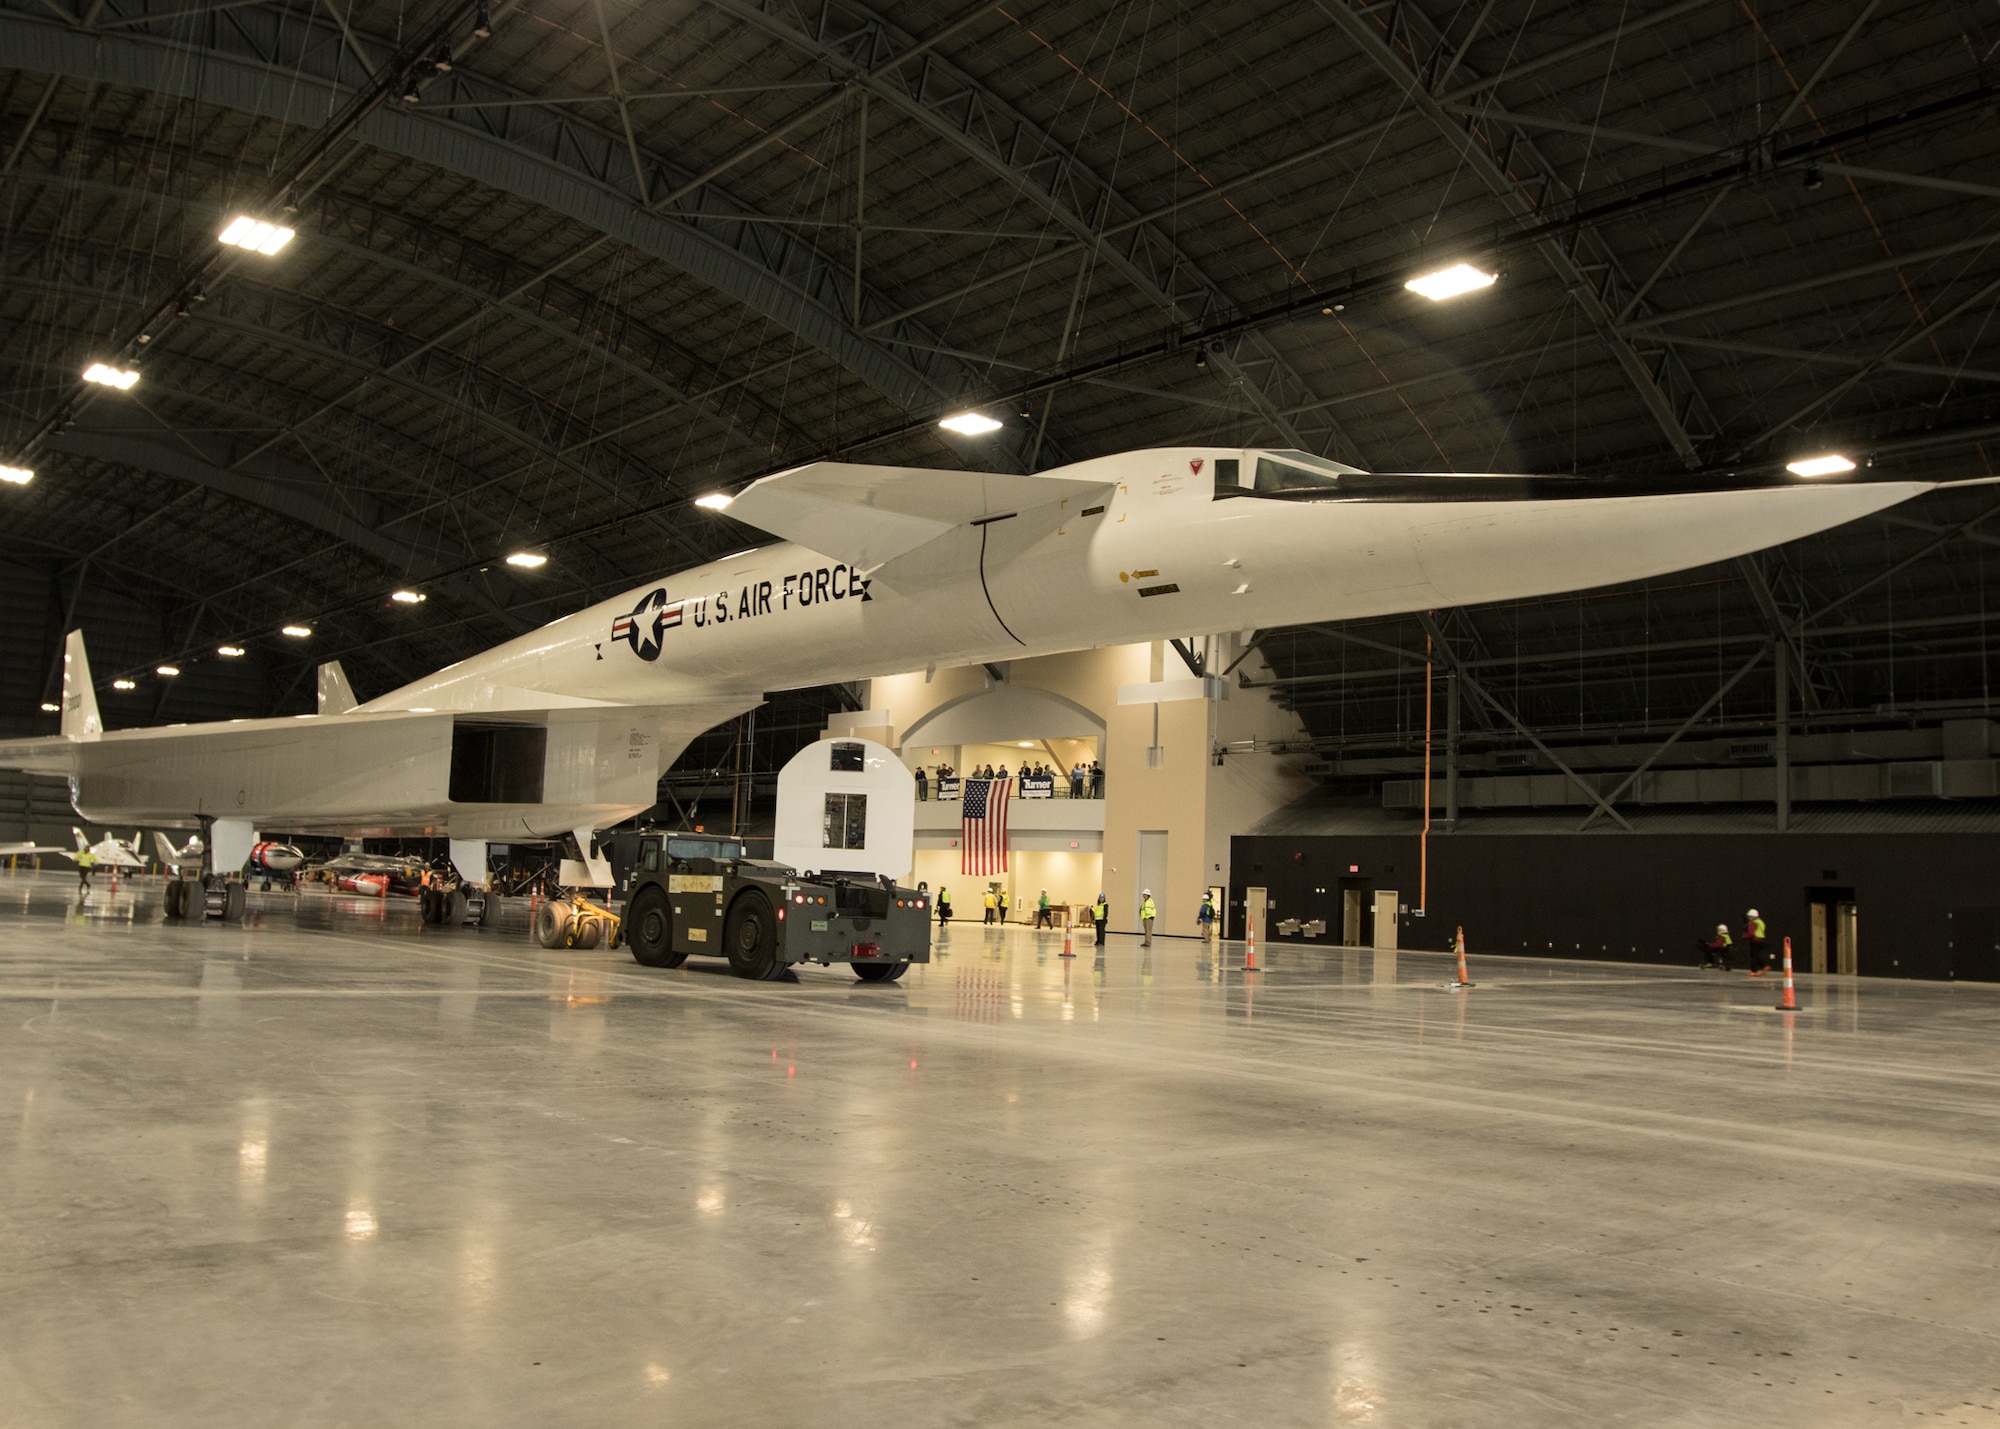 Restoration staff move the North American XB-70 Valkyrie into the new fourth building at the National Museum of the U.S. Air Force on Oct. 27, 2015. (U.S. Air Force photo by Don Popp)